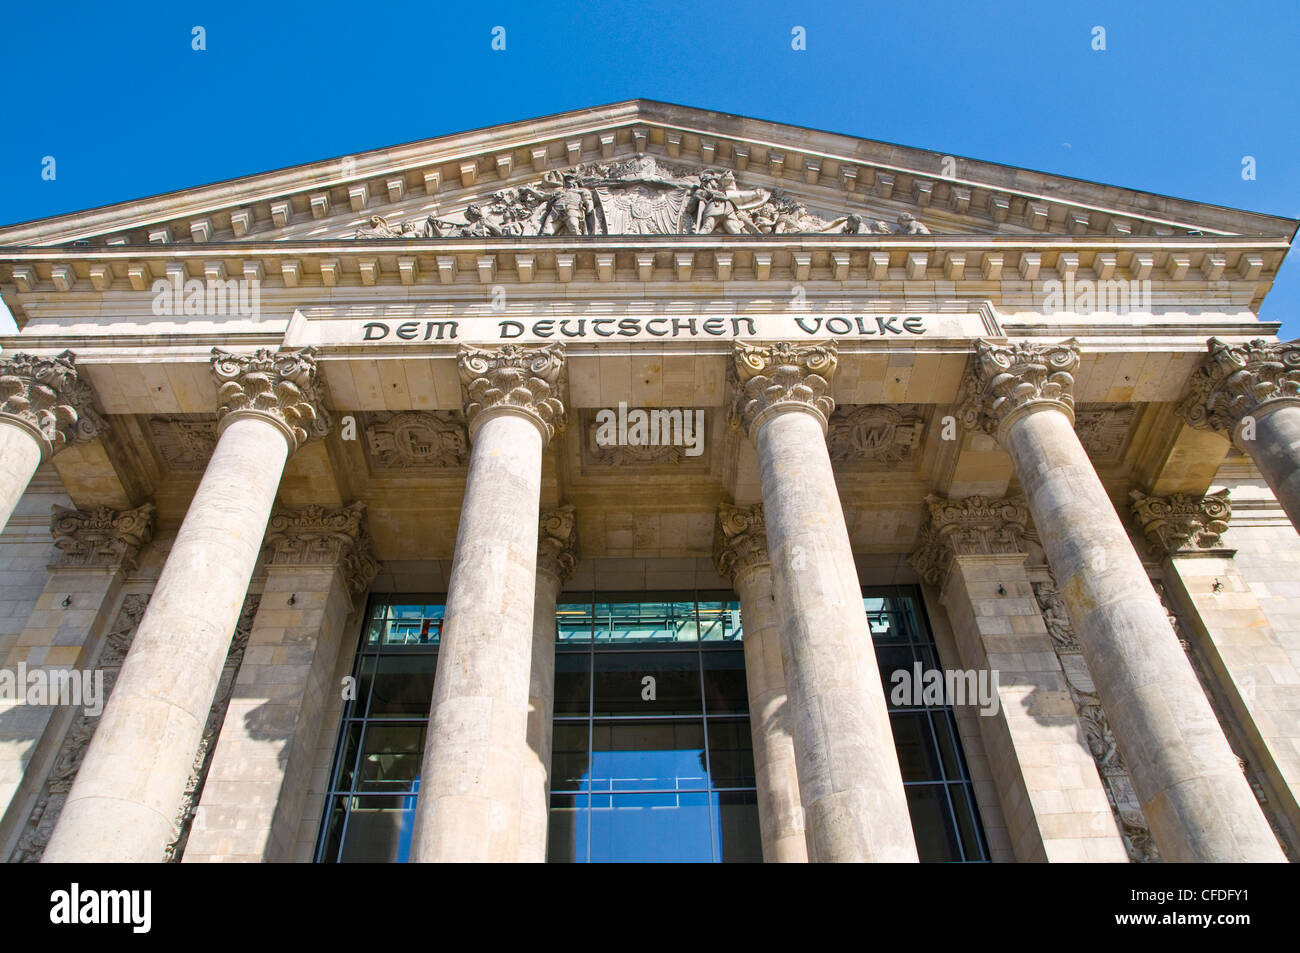 Le Reichstag (Parlement allemand), Berlin, Germany, Europe Banque D'Images